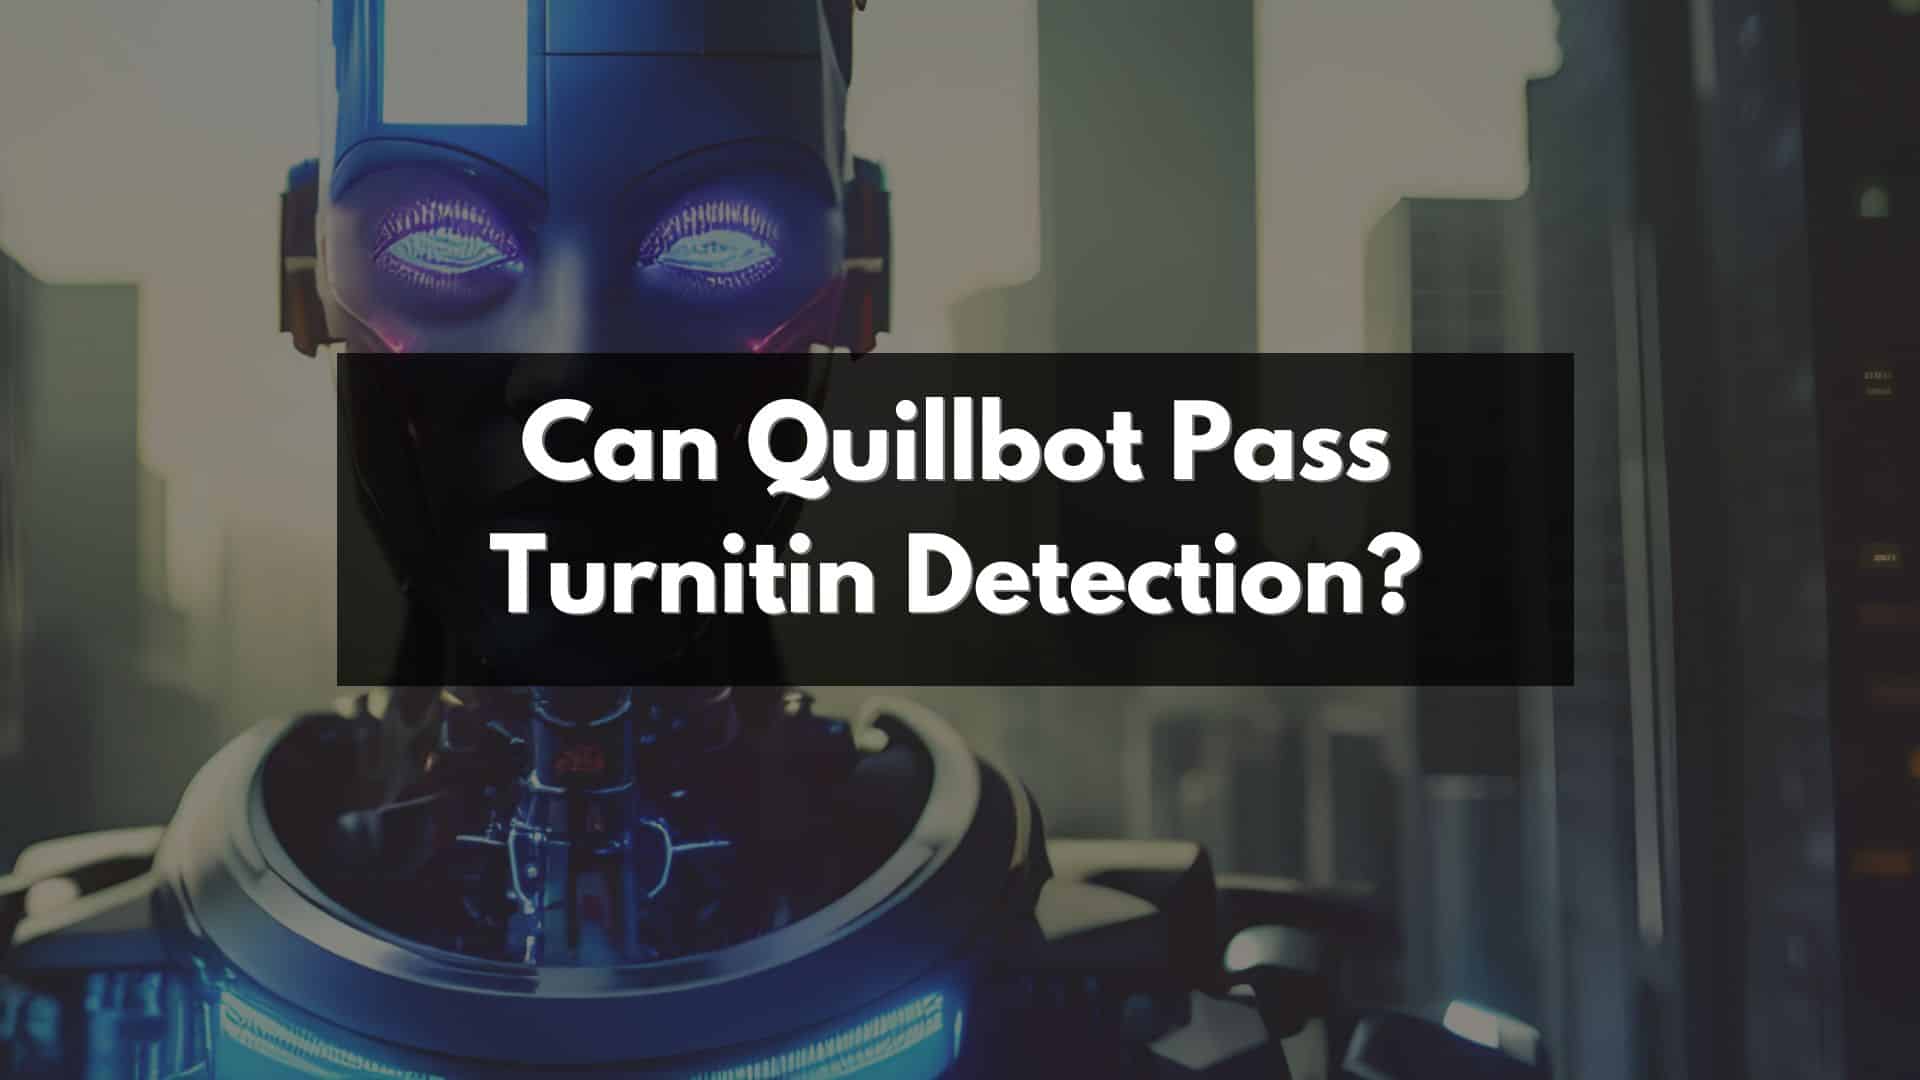 Can quillbot pass turnitin detection